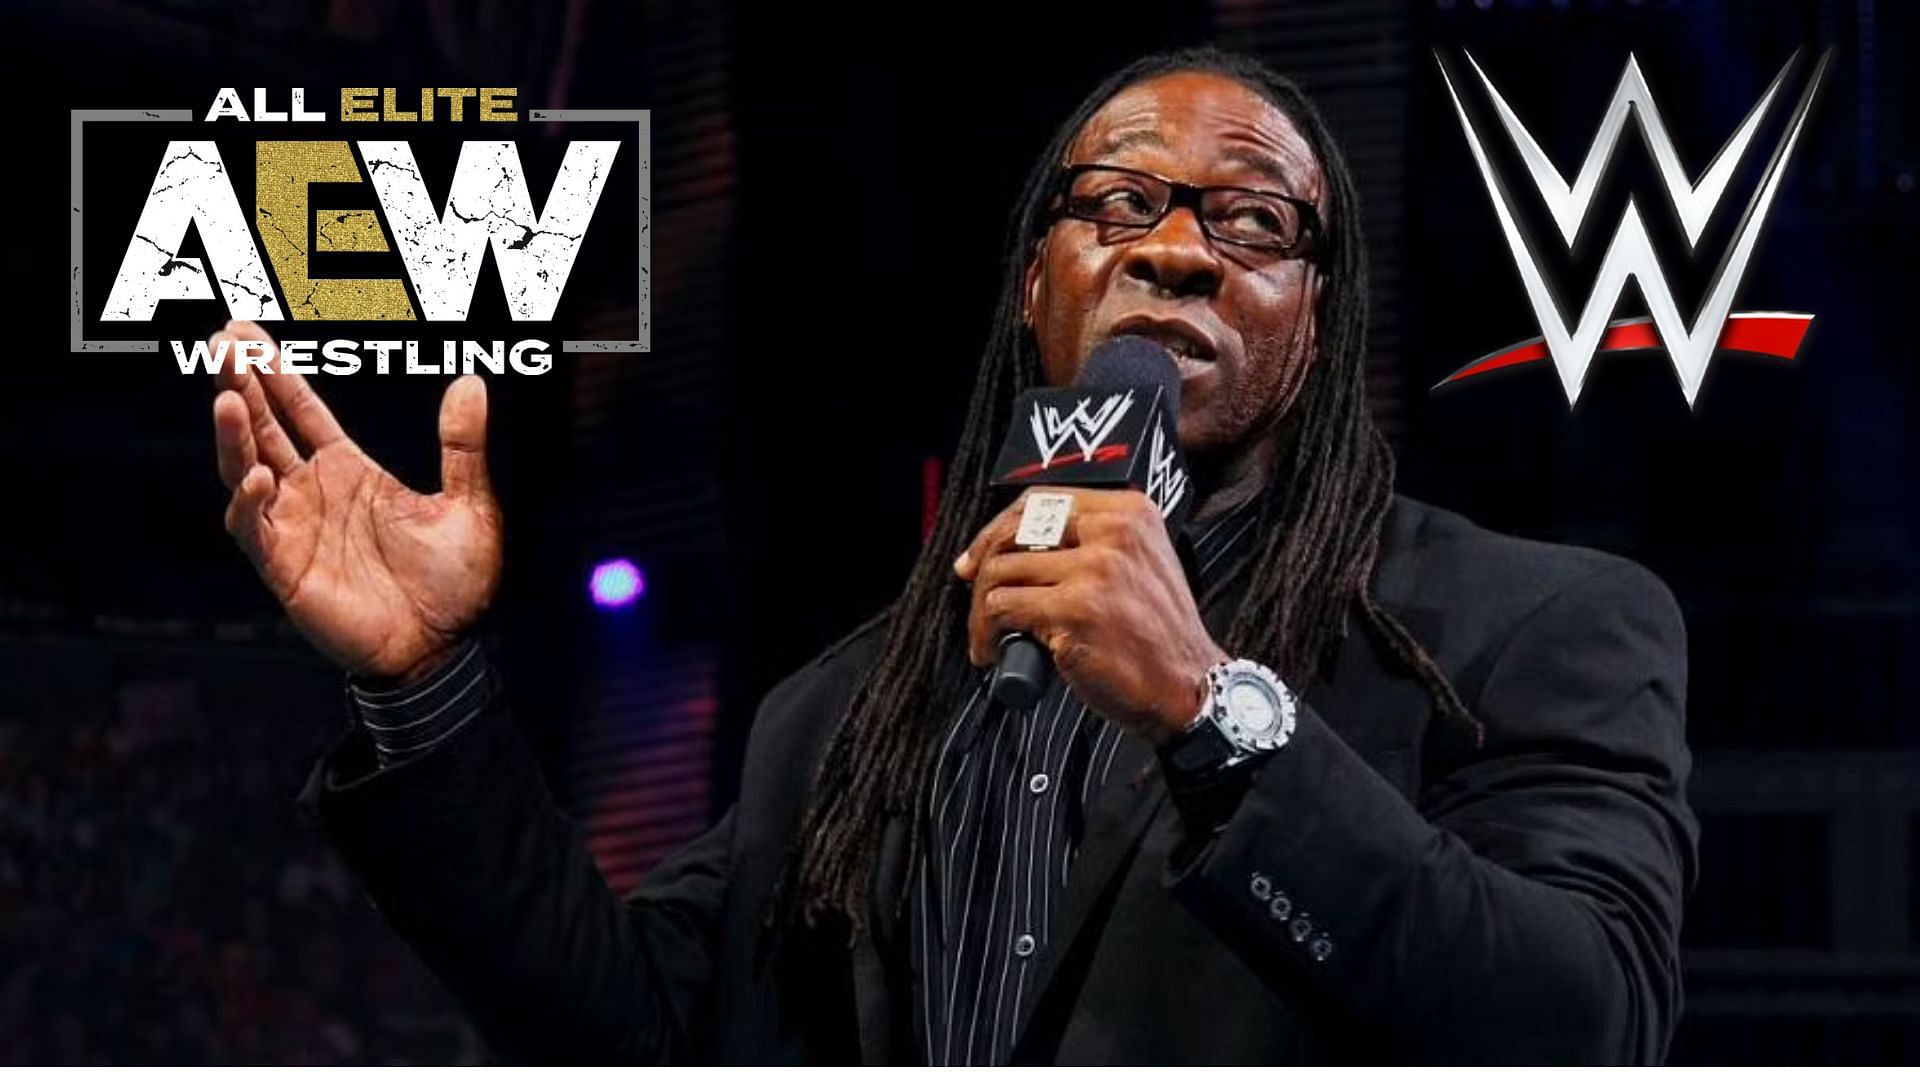 Booker T was not happy with AEW recently